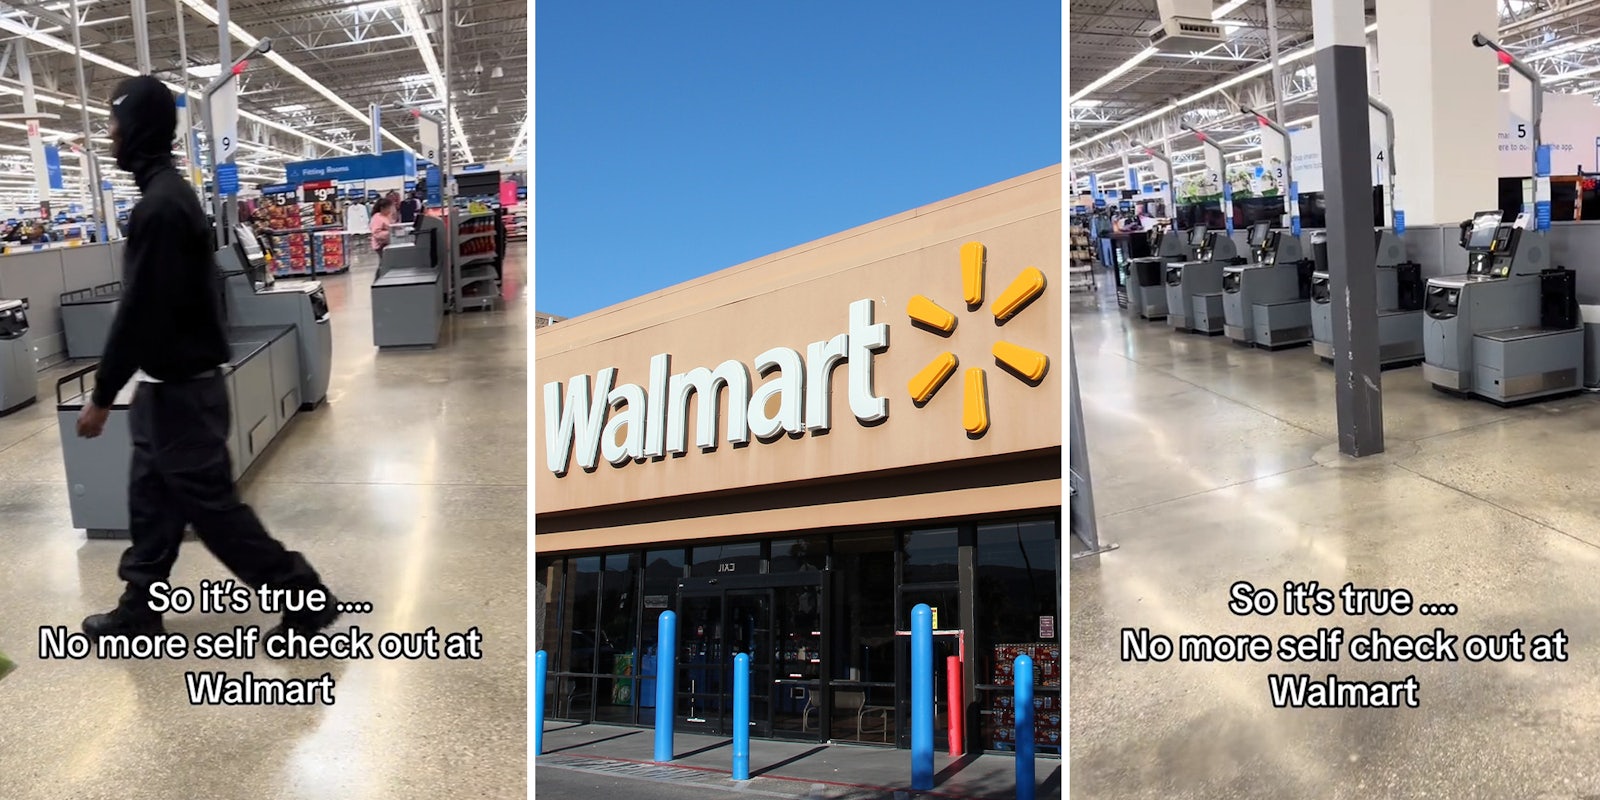 Walmart customer shows no more self-checkout section as security guards patrol abandoned stations